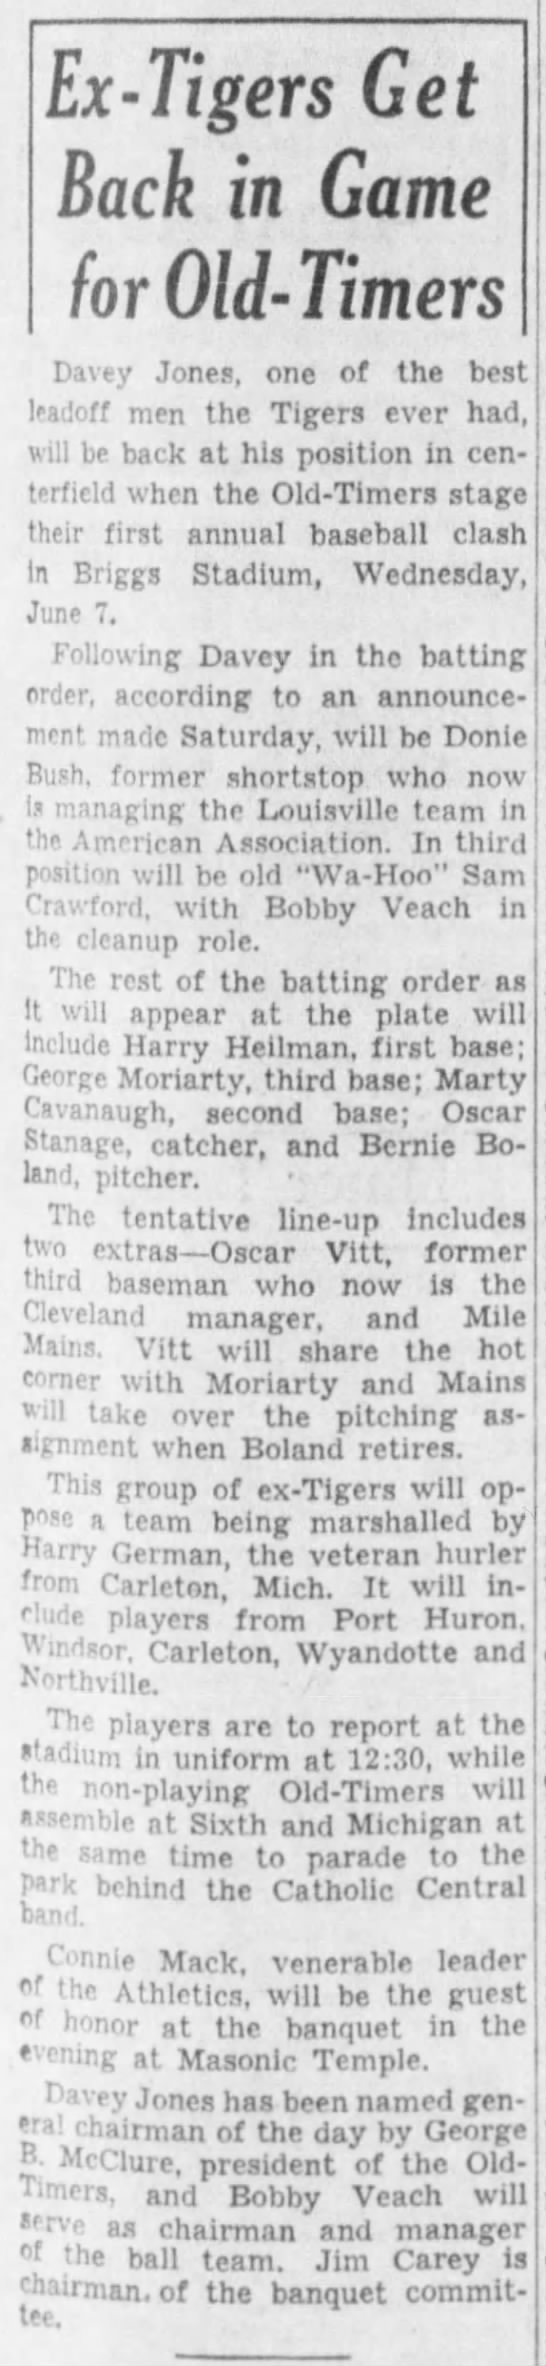 Sun 5/28/39: Announcement about Tigers' 1st Old-Timers game - 